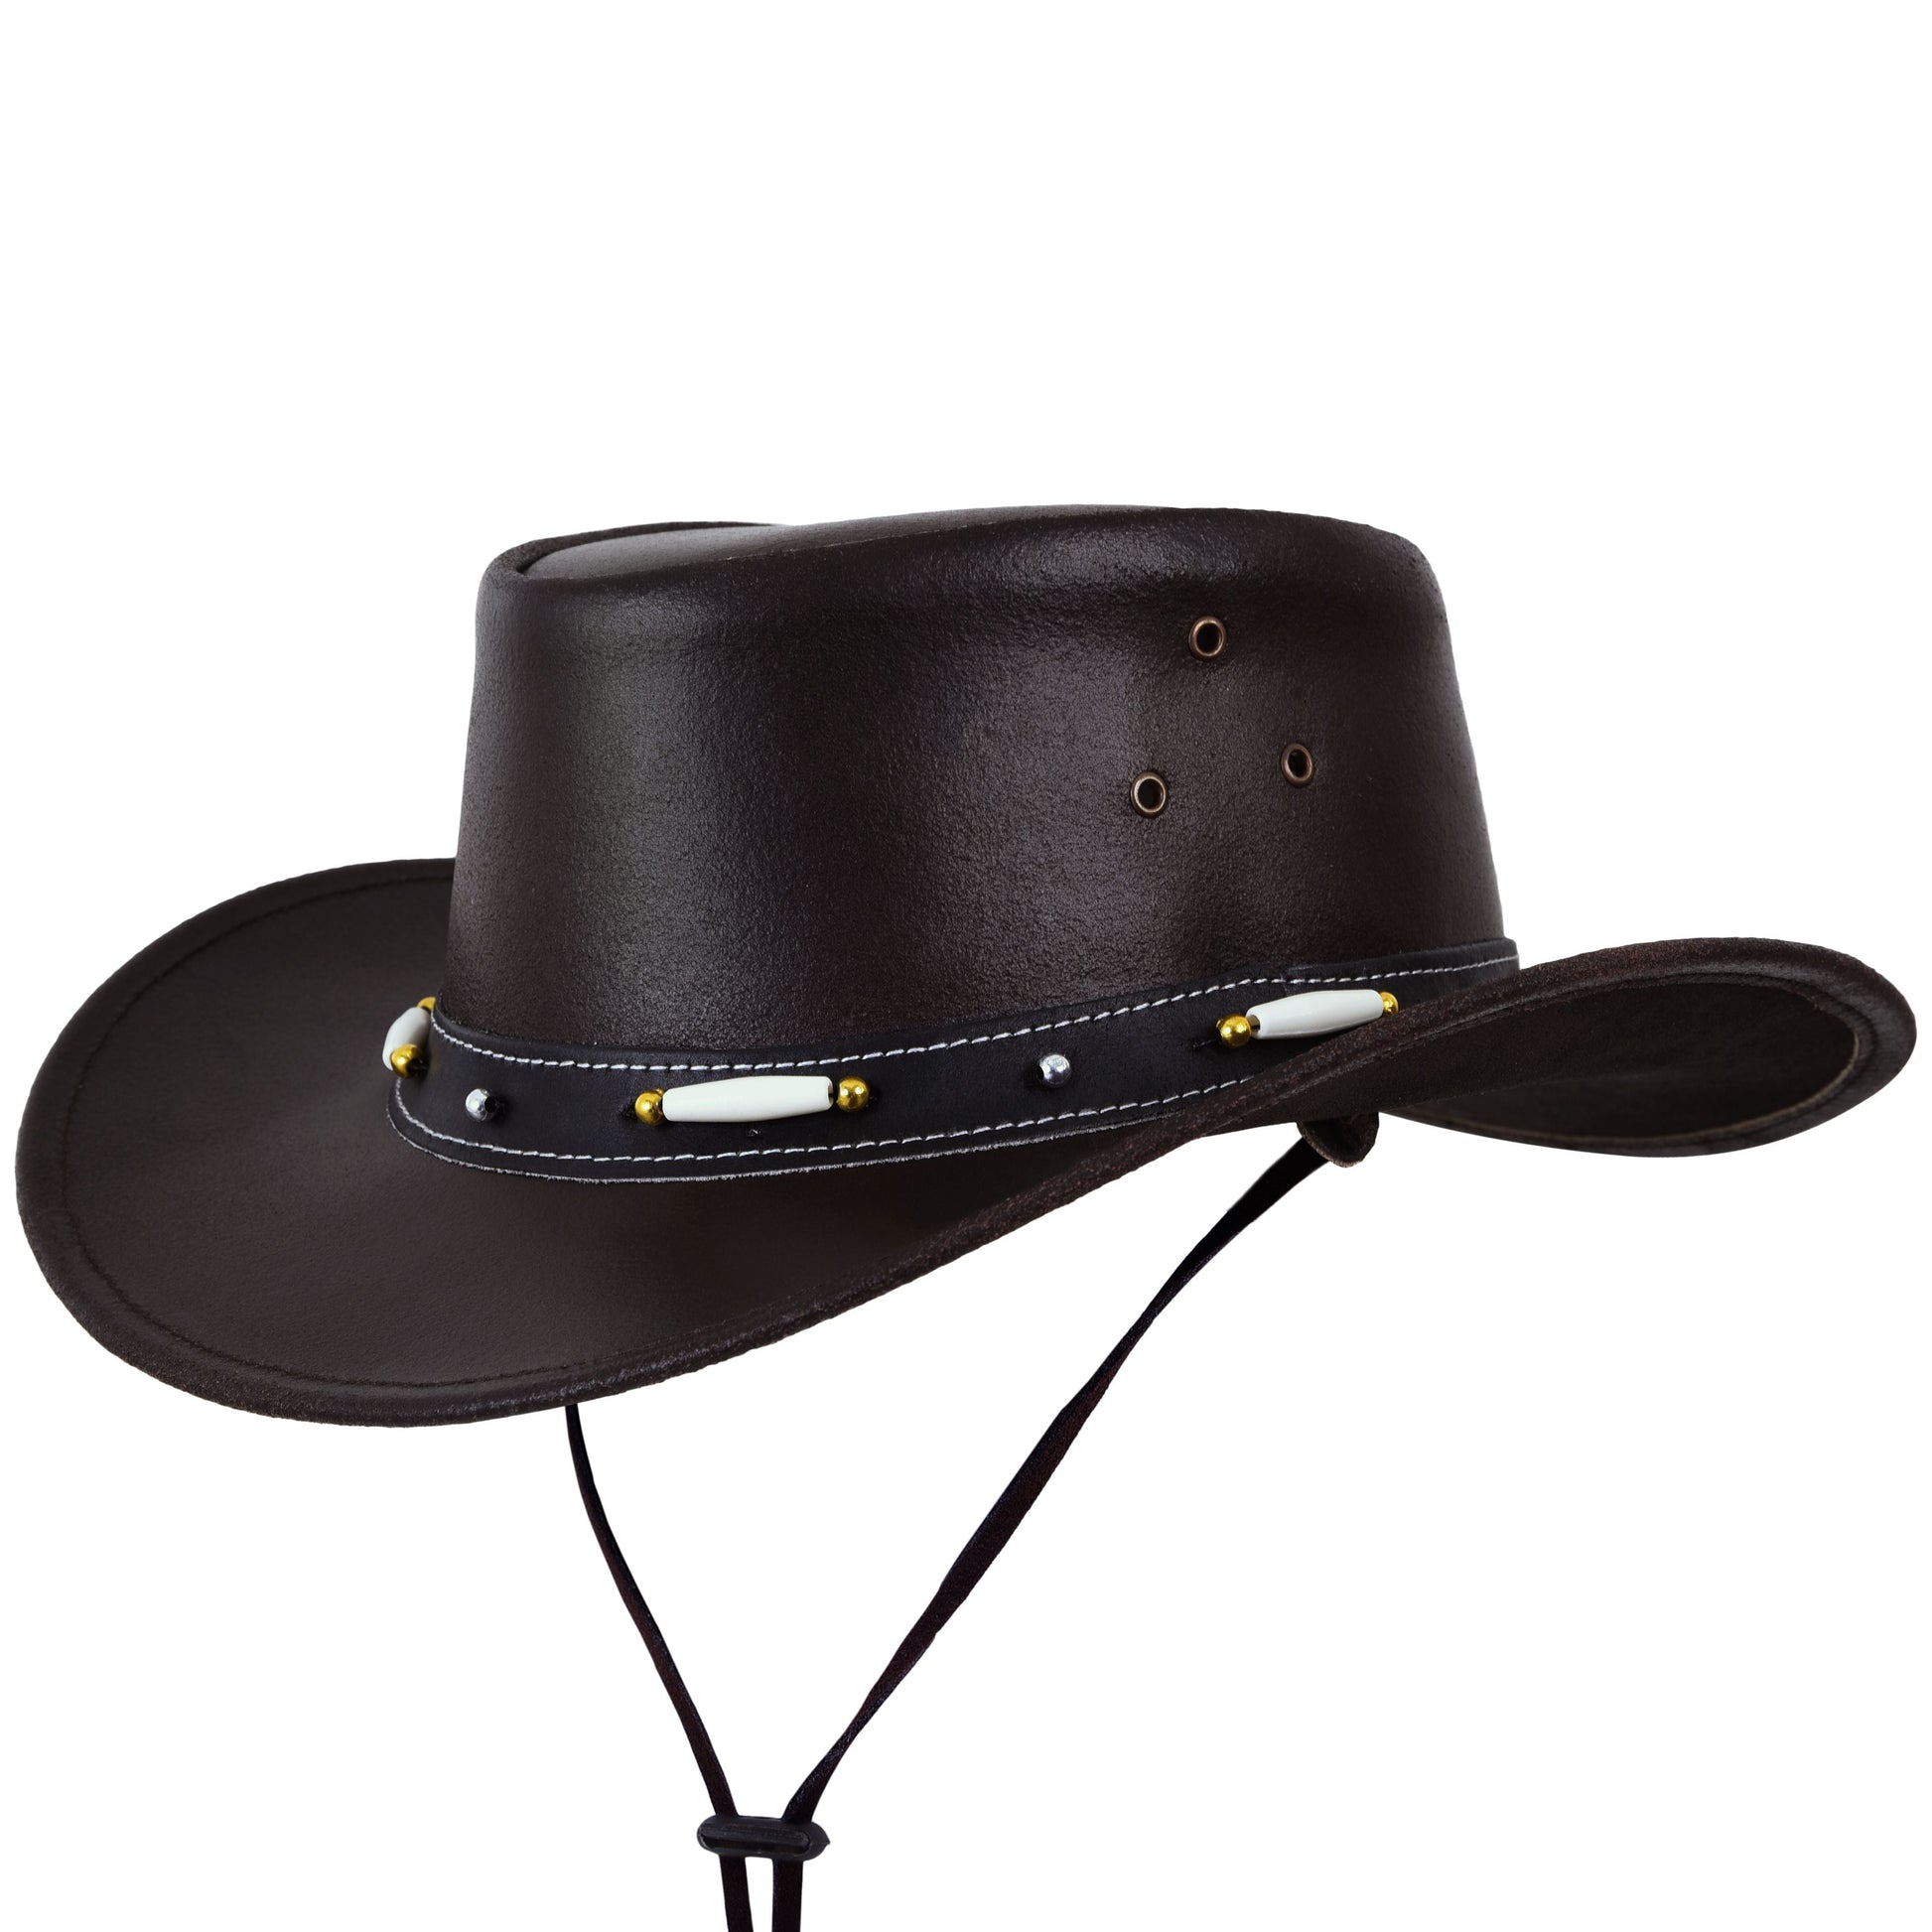 Bush Cowboy Hat Black Leather Cowboy Hat with Beaded Hat Band